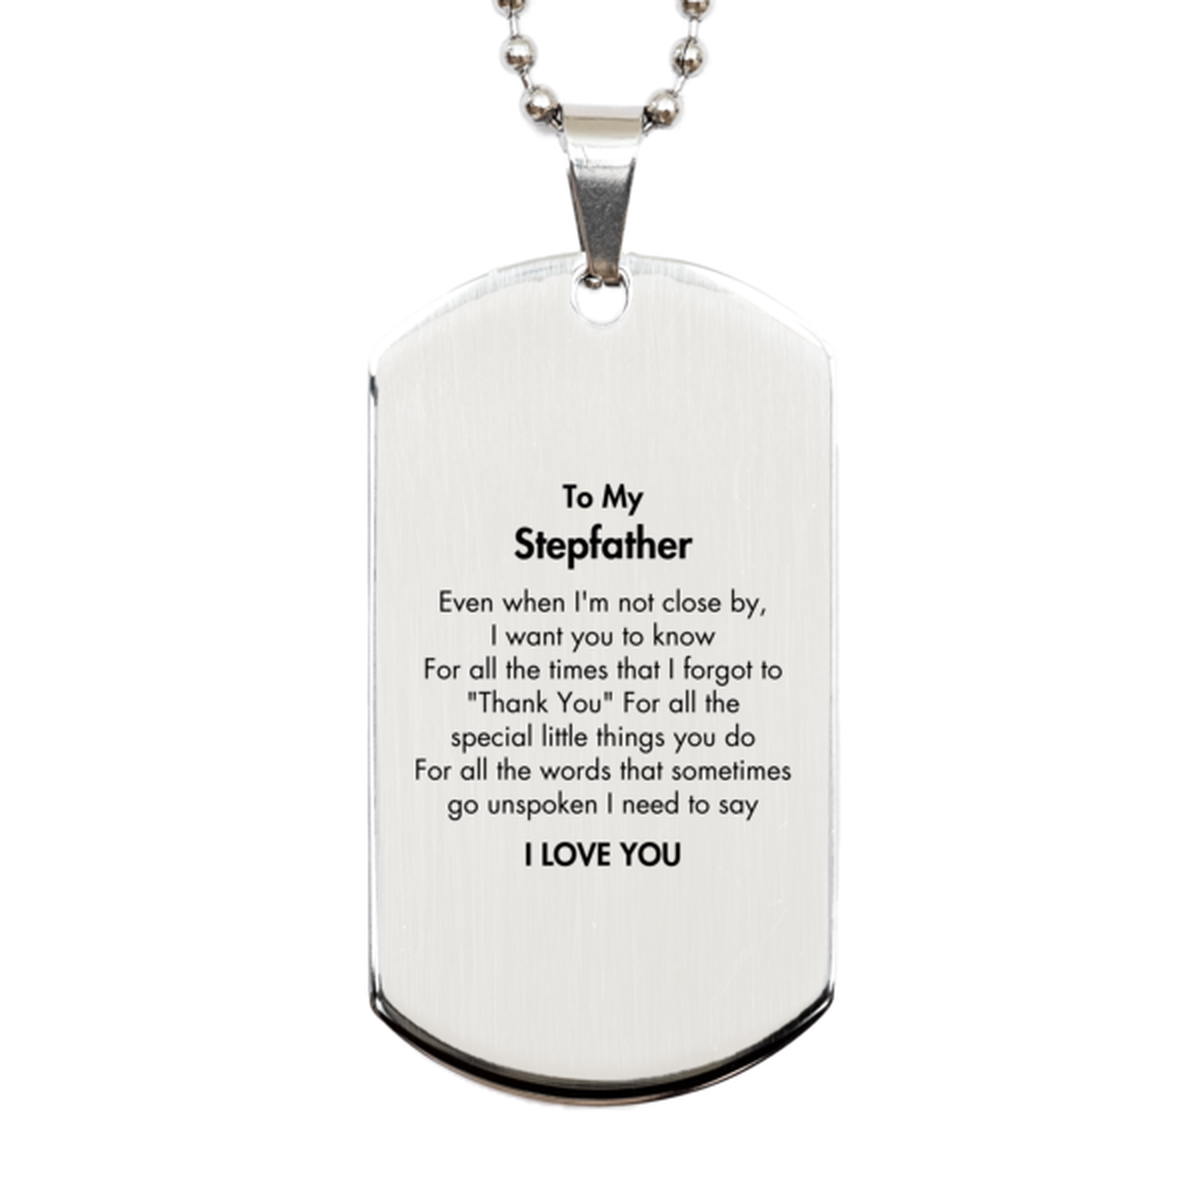 Thank You Gifts for Stepfather, Keepsake Silver Dog Tag Gifts for Stepfather Birthday Mother's day Father's Day Stepfather For all the words That sometimes go unspoken I need to say I LOVE YOU